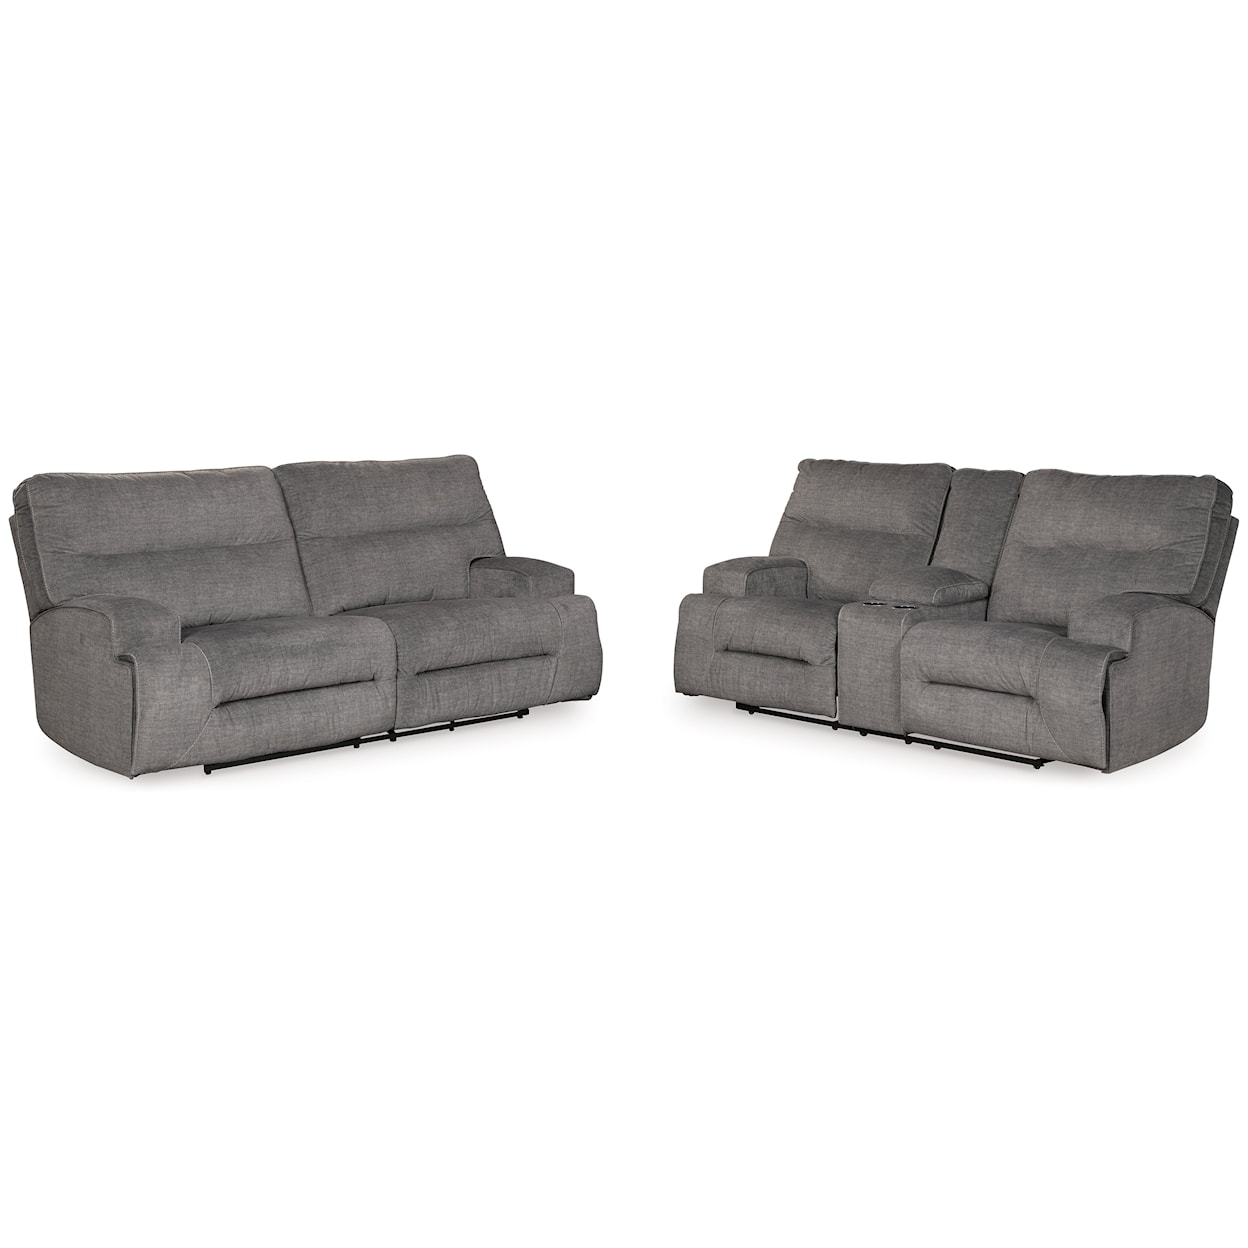 Signature Design by Ashley Coombs Reclining Sofa and Loveseat Set